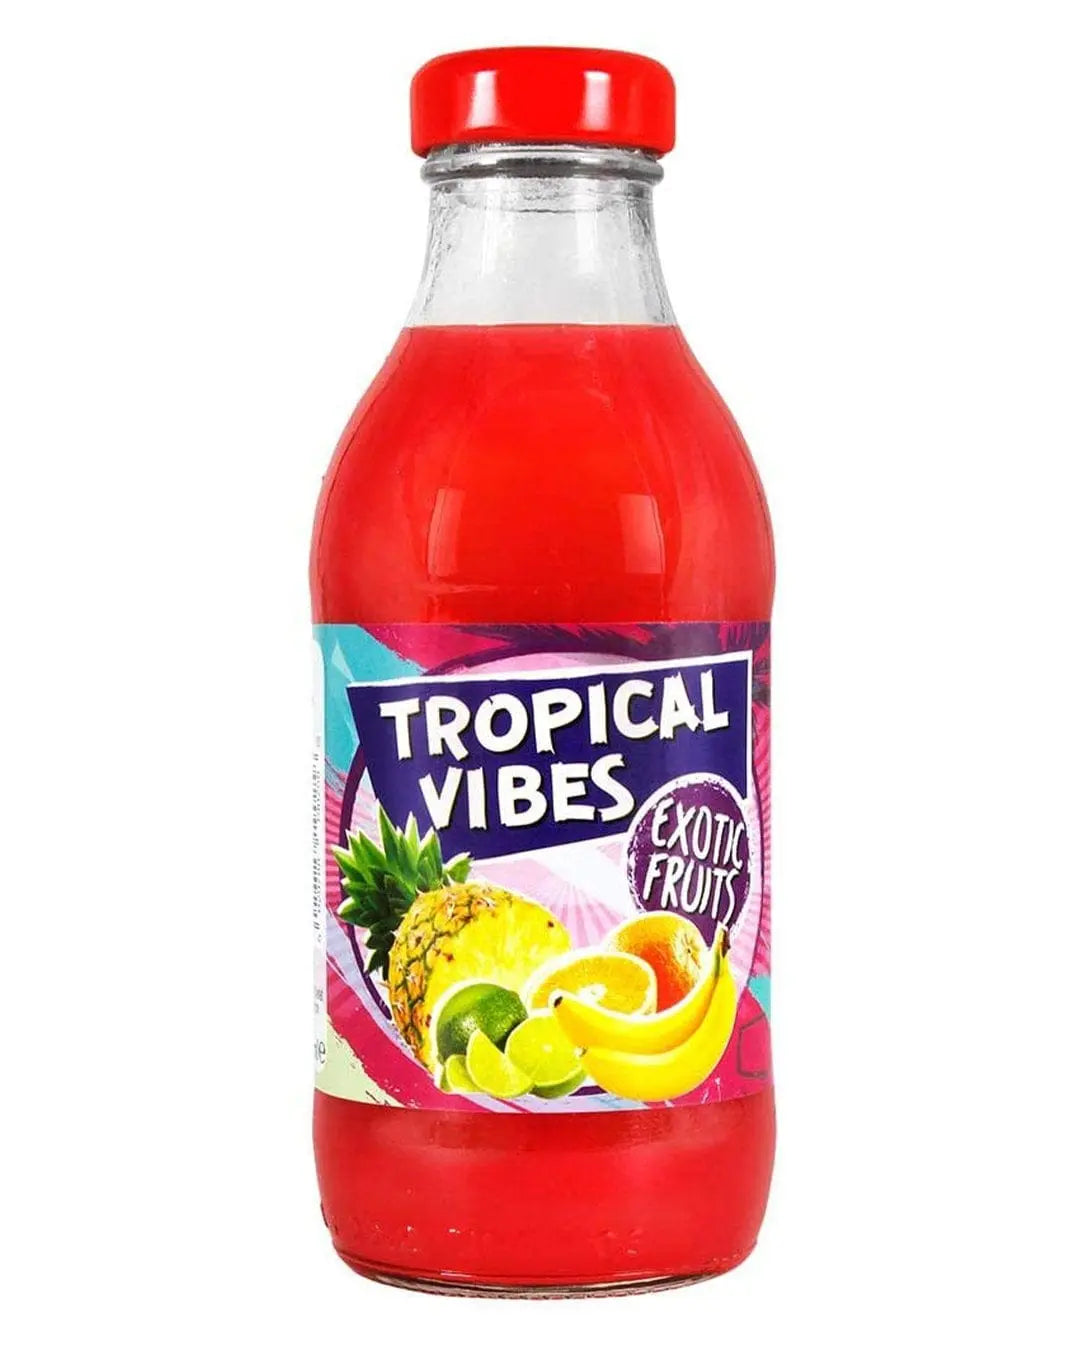 Tropical Vibes Exotic Fruits Drink Multipack, 15 x 300 ml Soft Drinks & Mixers 05029788190340